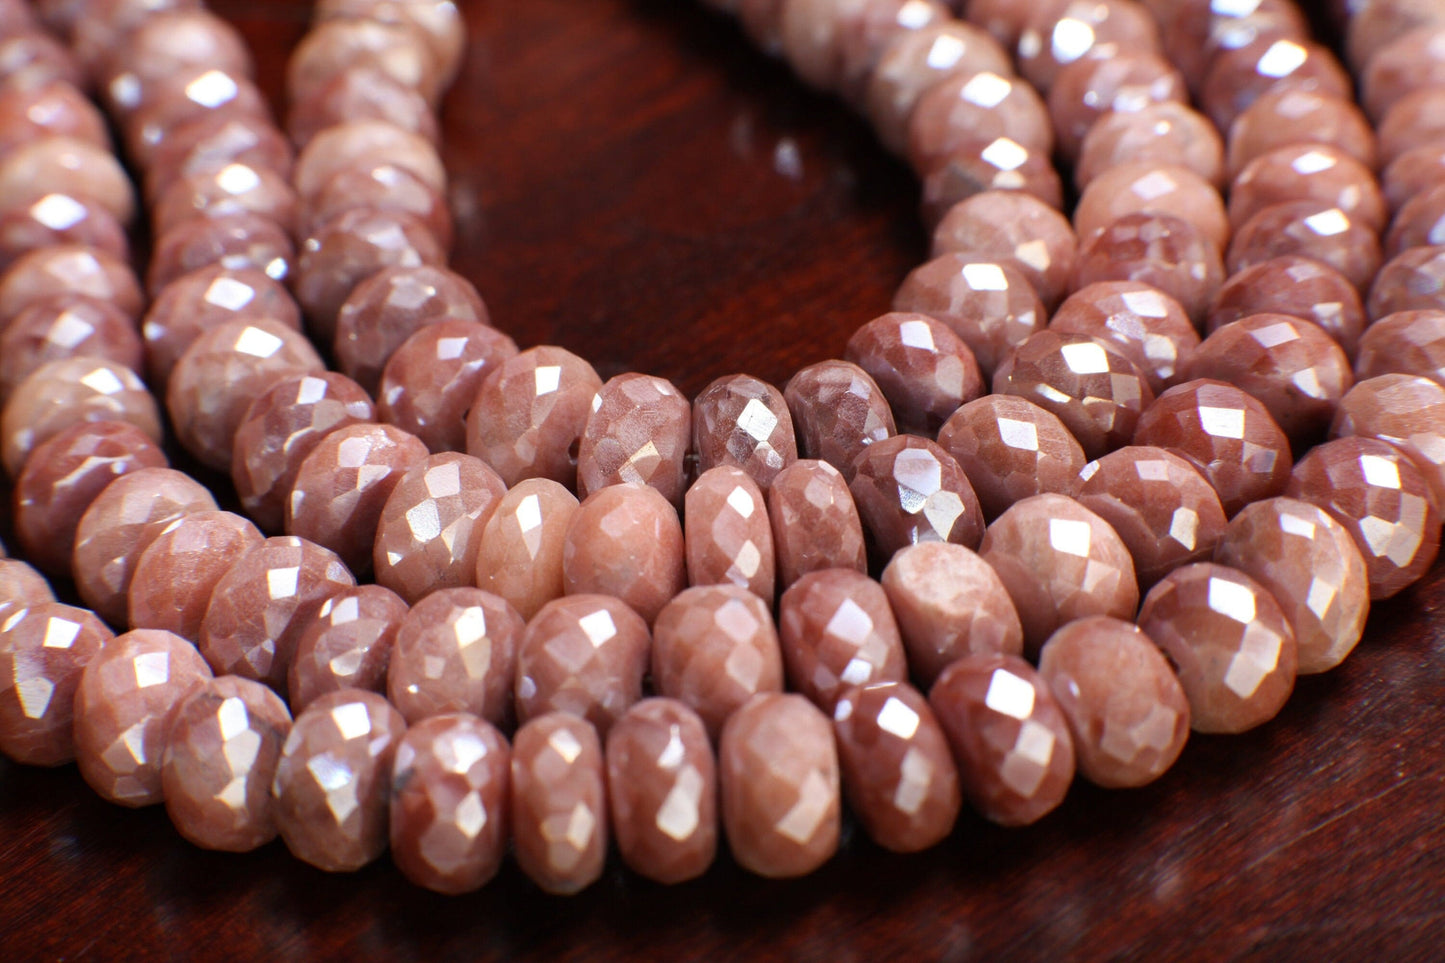 Natural Peach Silverite Moonstone Shaded Mystic Faceted Roundels 7.5-8.5mm, 9-10mm Gemstone, High Quality, Jewelry Making Beads.